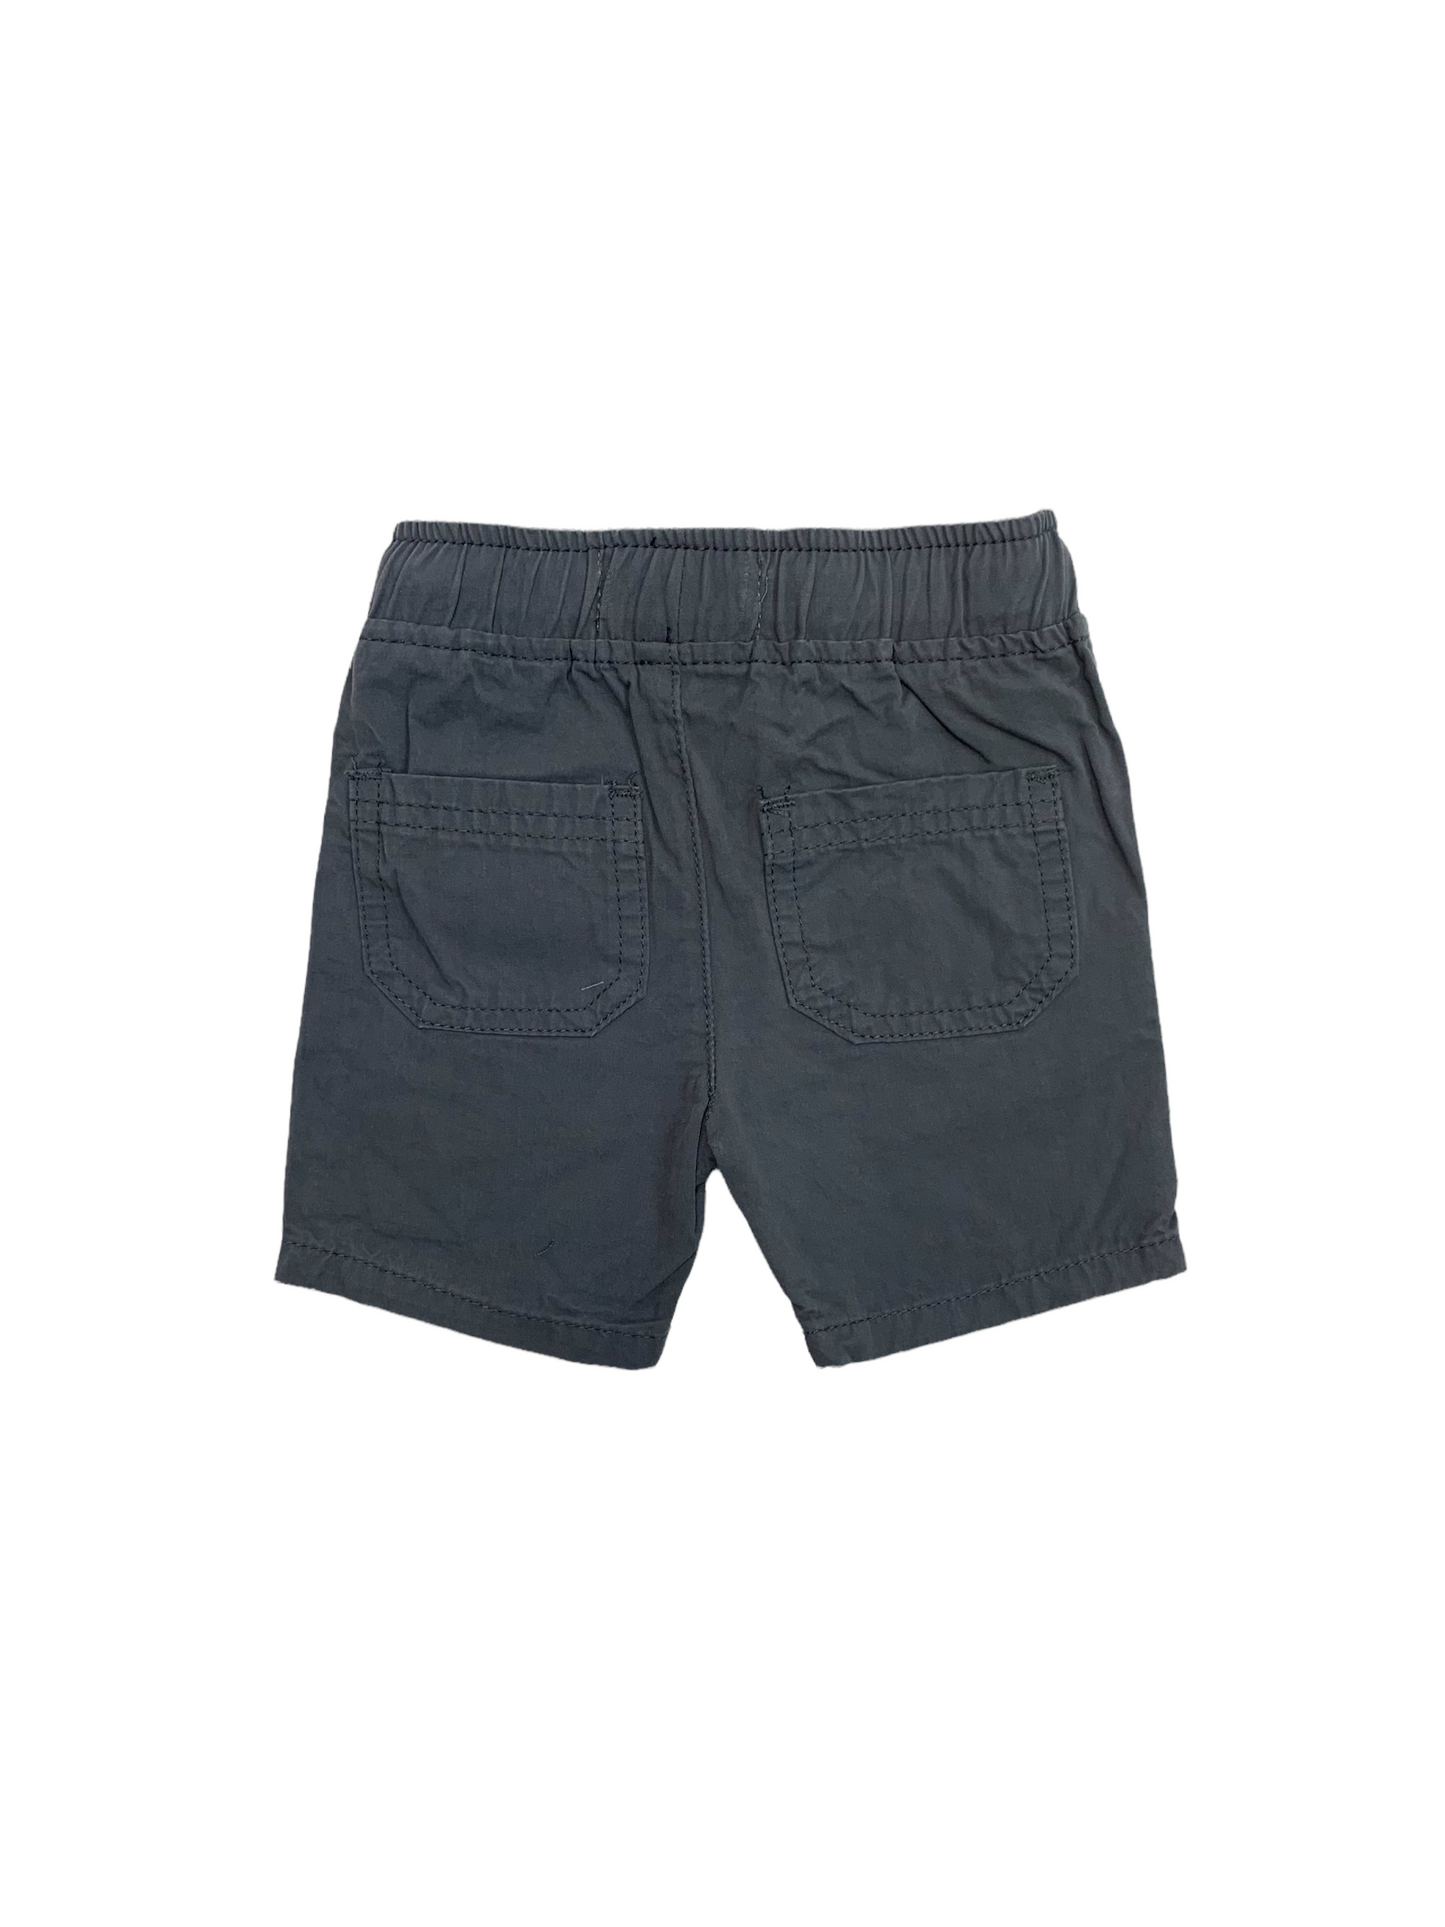 Gray Romy&Aksel Bermuda shorts for boys 2 to 8 years